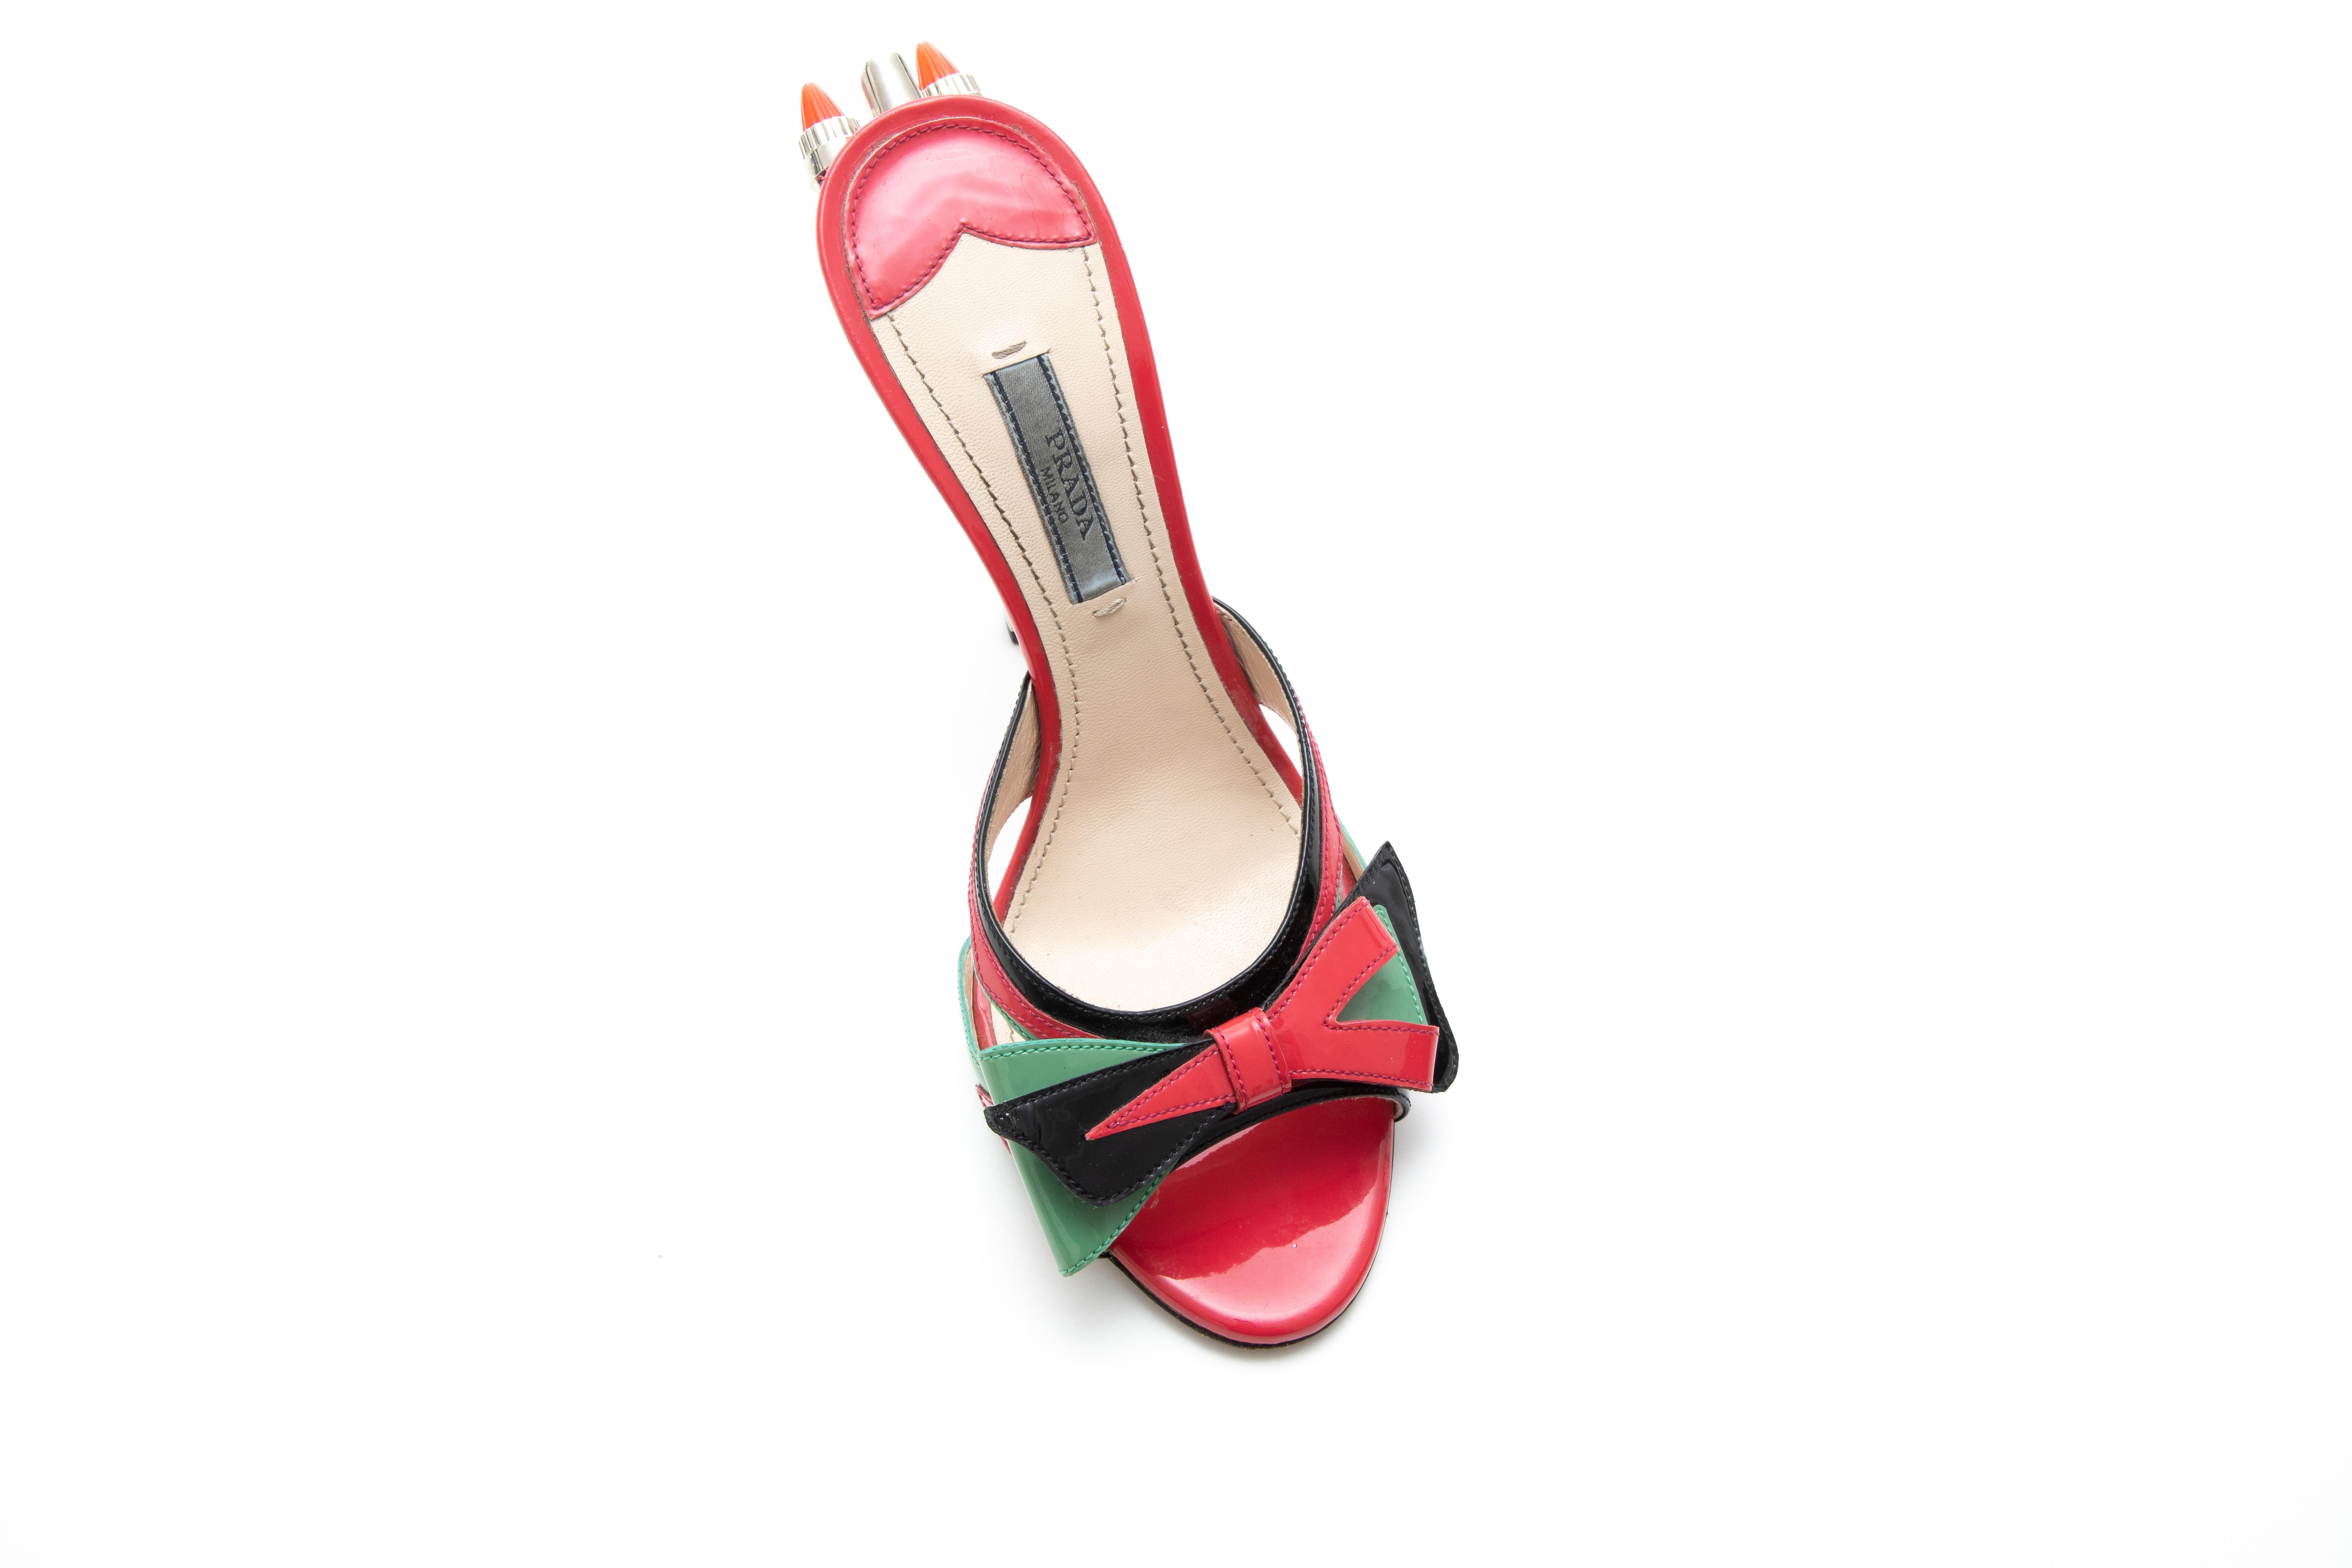 Prada Runway Patent Leather Tail Light Sandal, Spring 2012 For Sale 1